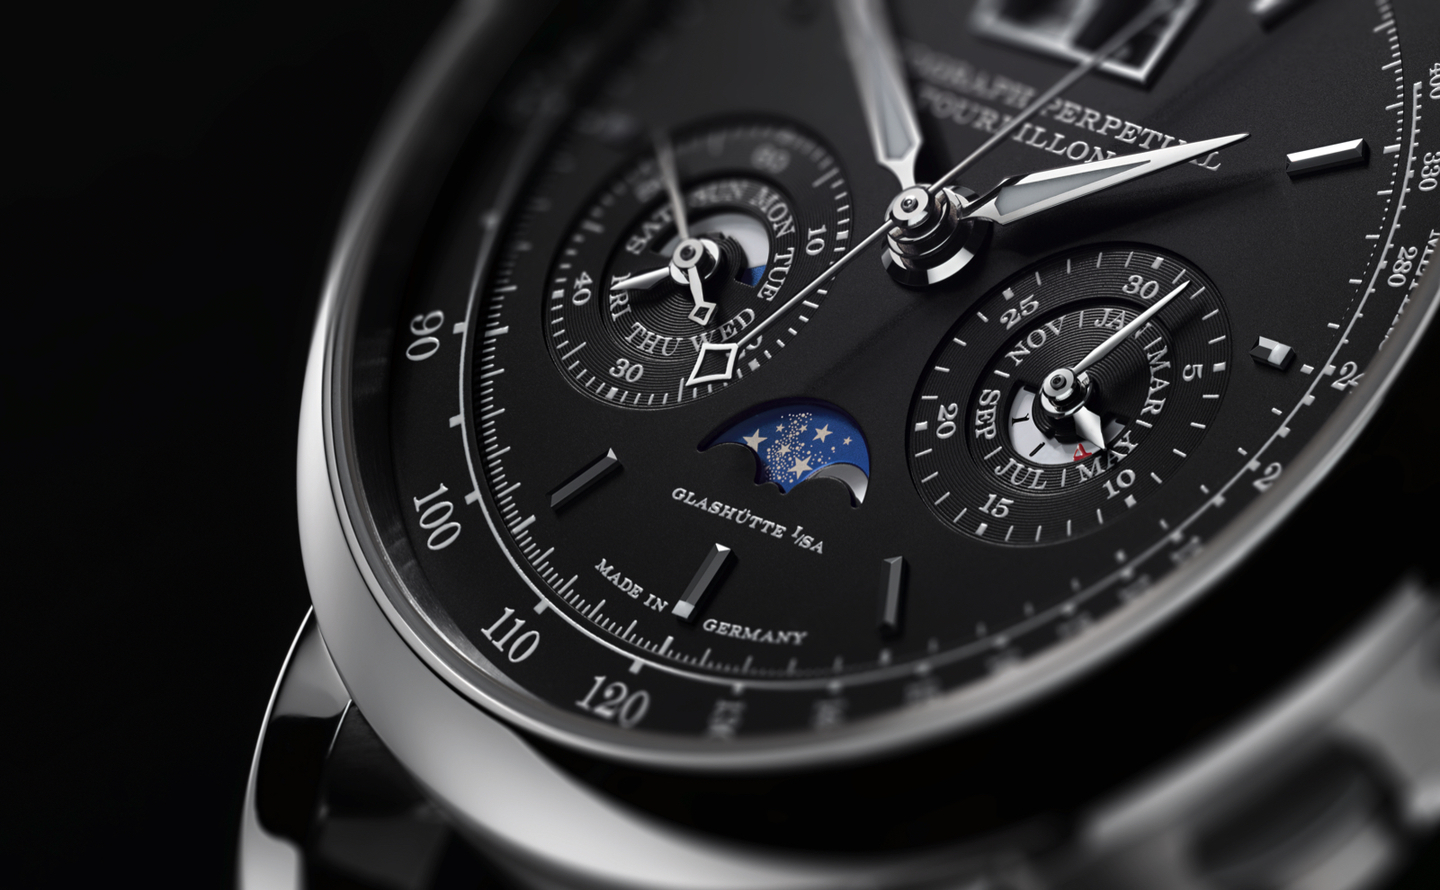 Datograph Perpetual Tourbillon explained by Anthony de Haas